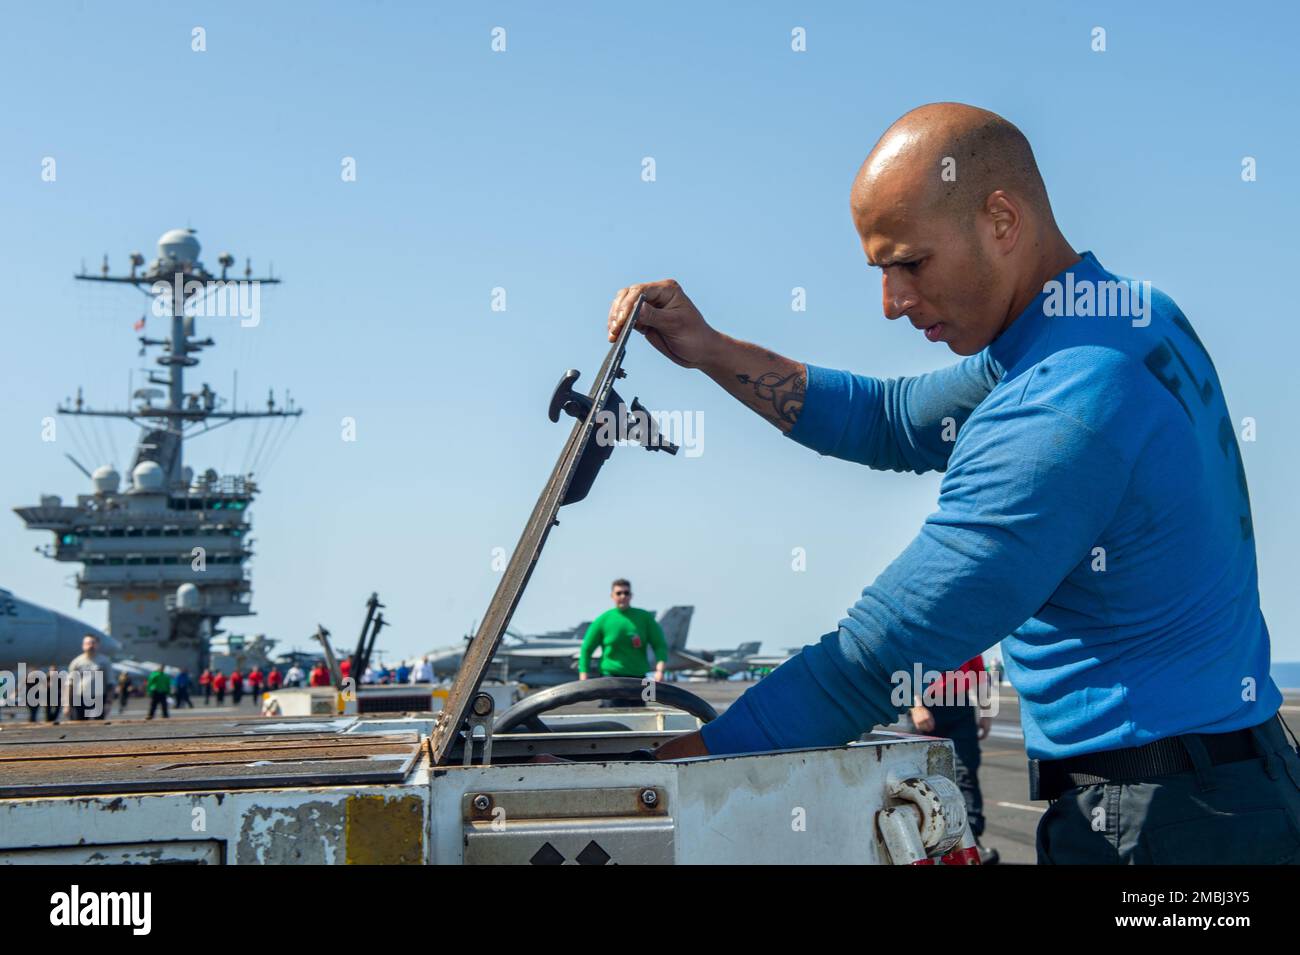 220616-N-GP384-1115 MEDITERRANEAN SEA (June 16, 2022) Aviation Boatswain's Mate (Handling) Airman Austin Campbell inspects a spotting dolly for foreign object debris on the flight deck of USS Harry S. Truman (CVN 75), June 16, 2022. The Harry S. Truman Carrier Strike Group is on a scheduled deployment in the U.S. Naval Forces Europe area of operations, employed by U.S. Sixth Fleet to defend U.S., allied and partner interests. Stock Photo